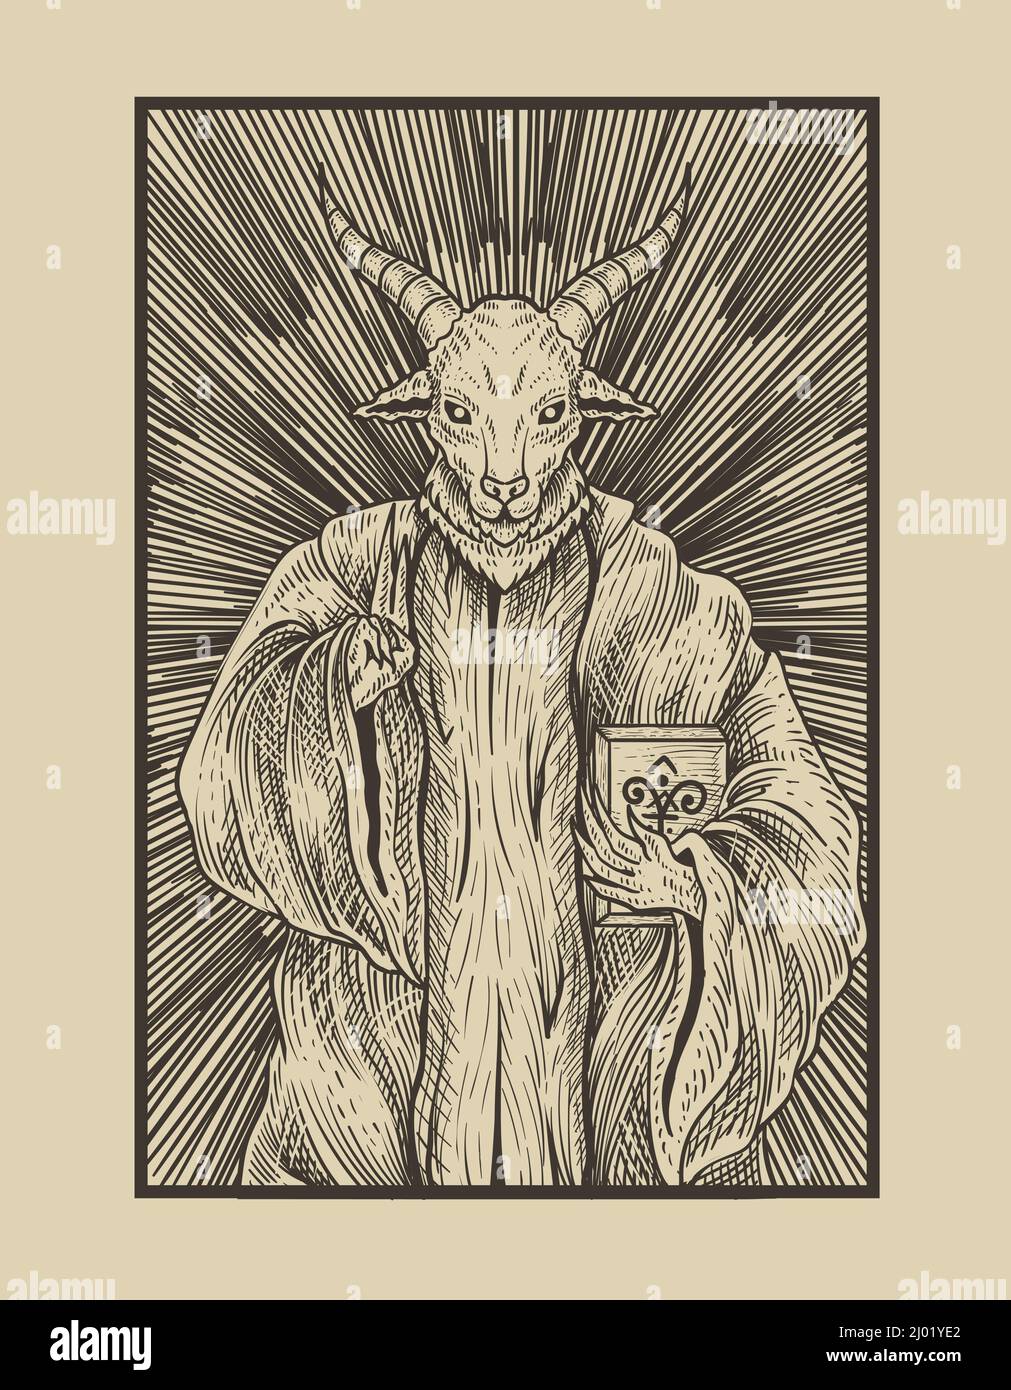 illustration baphomet god with engraving style Stock Vector